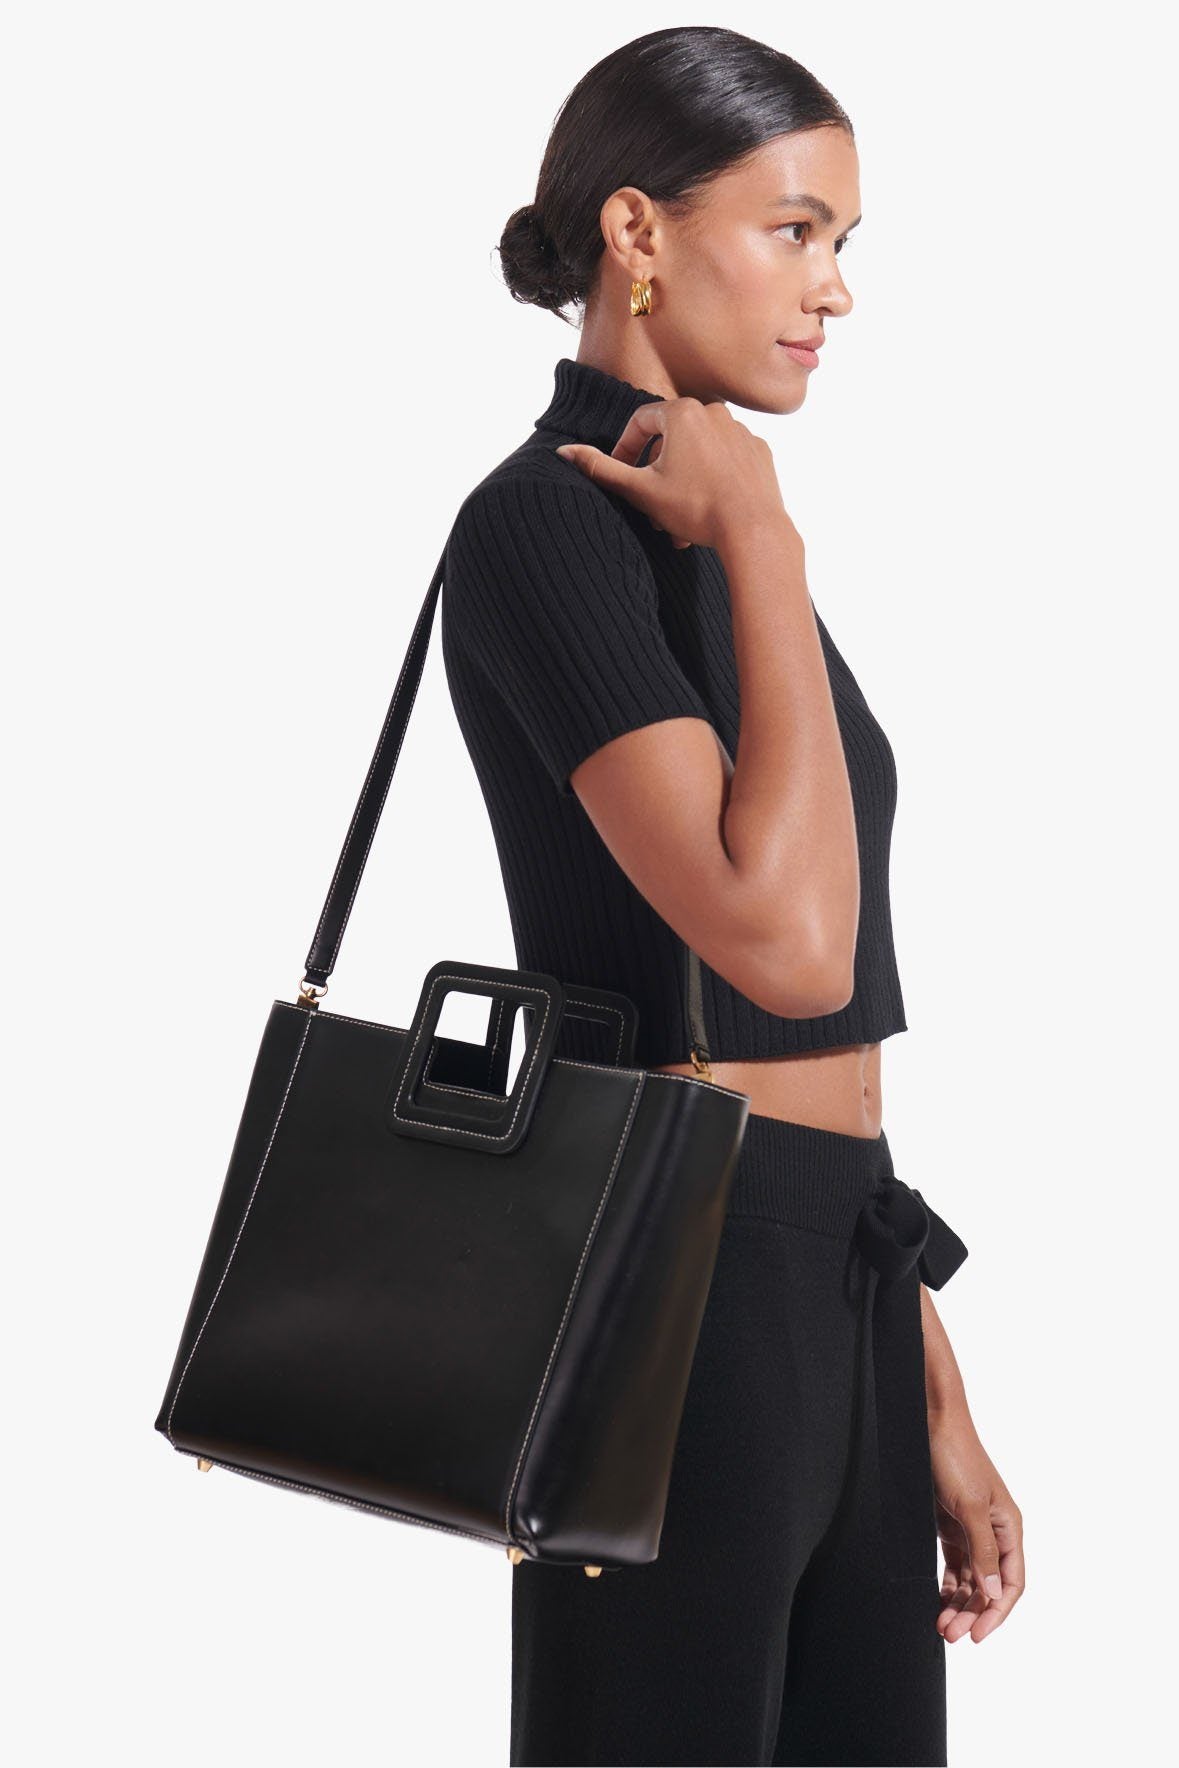 Shirley Staud Bags - Vestiaire Collective